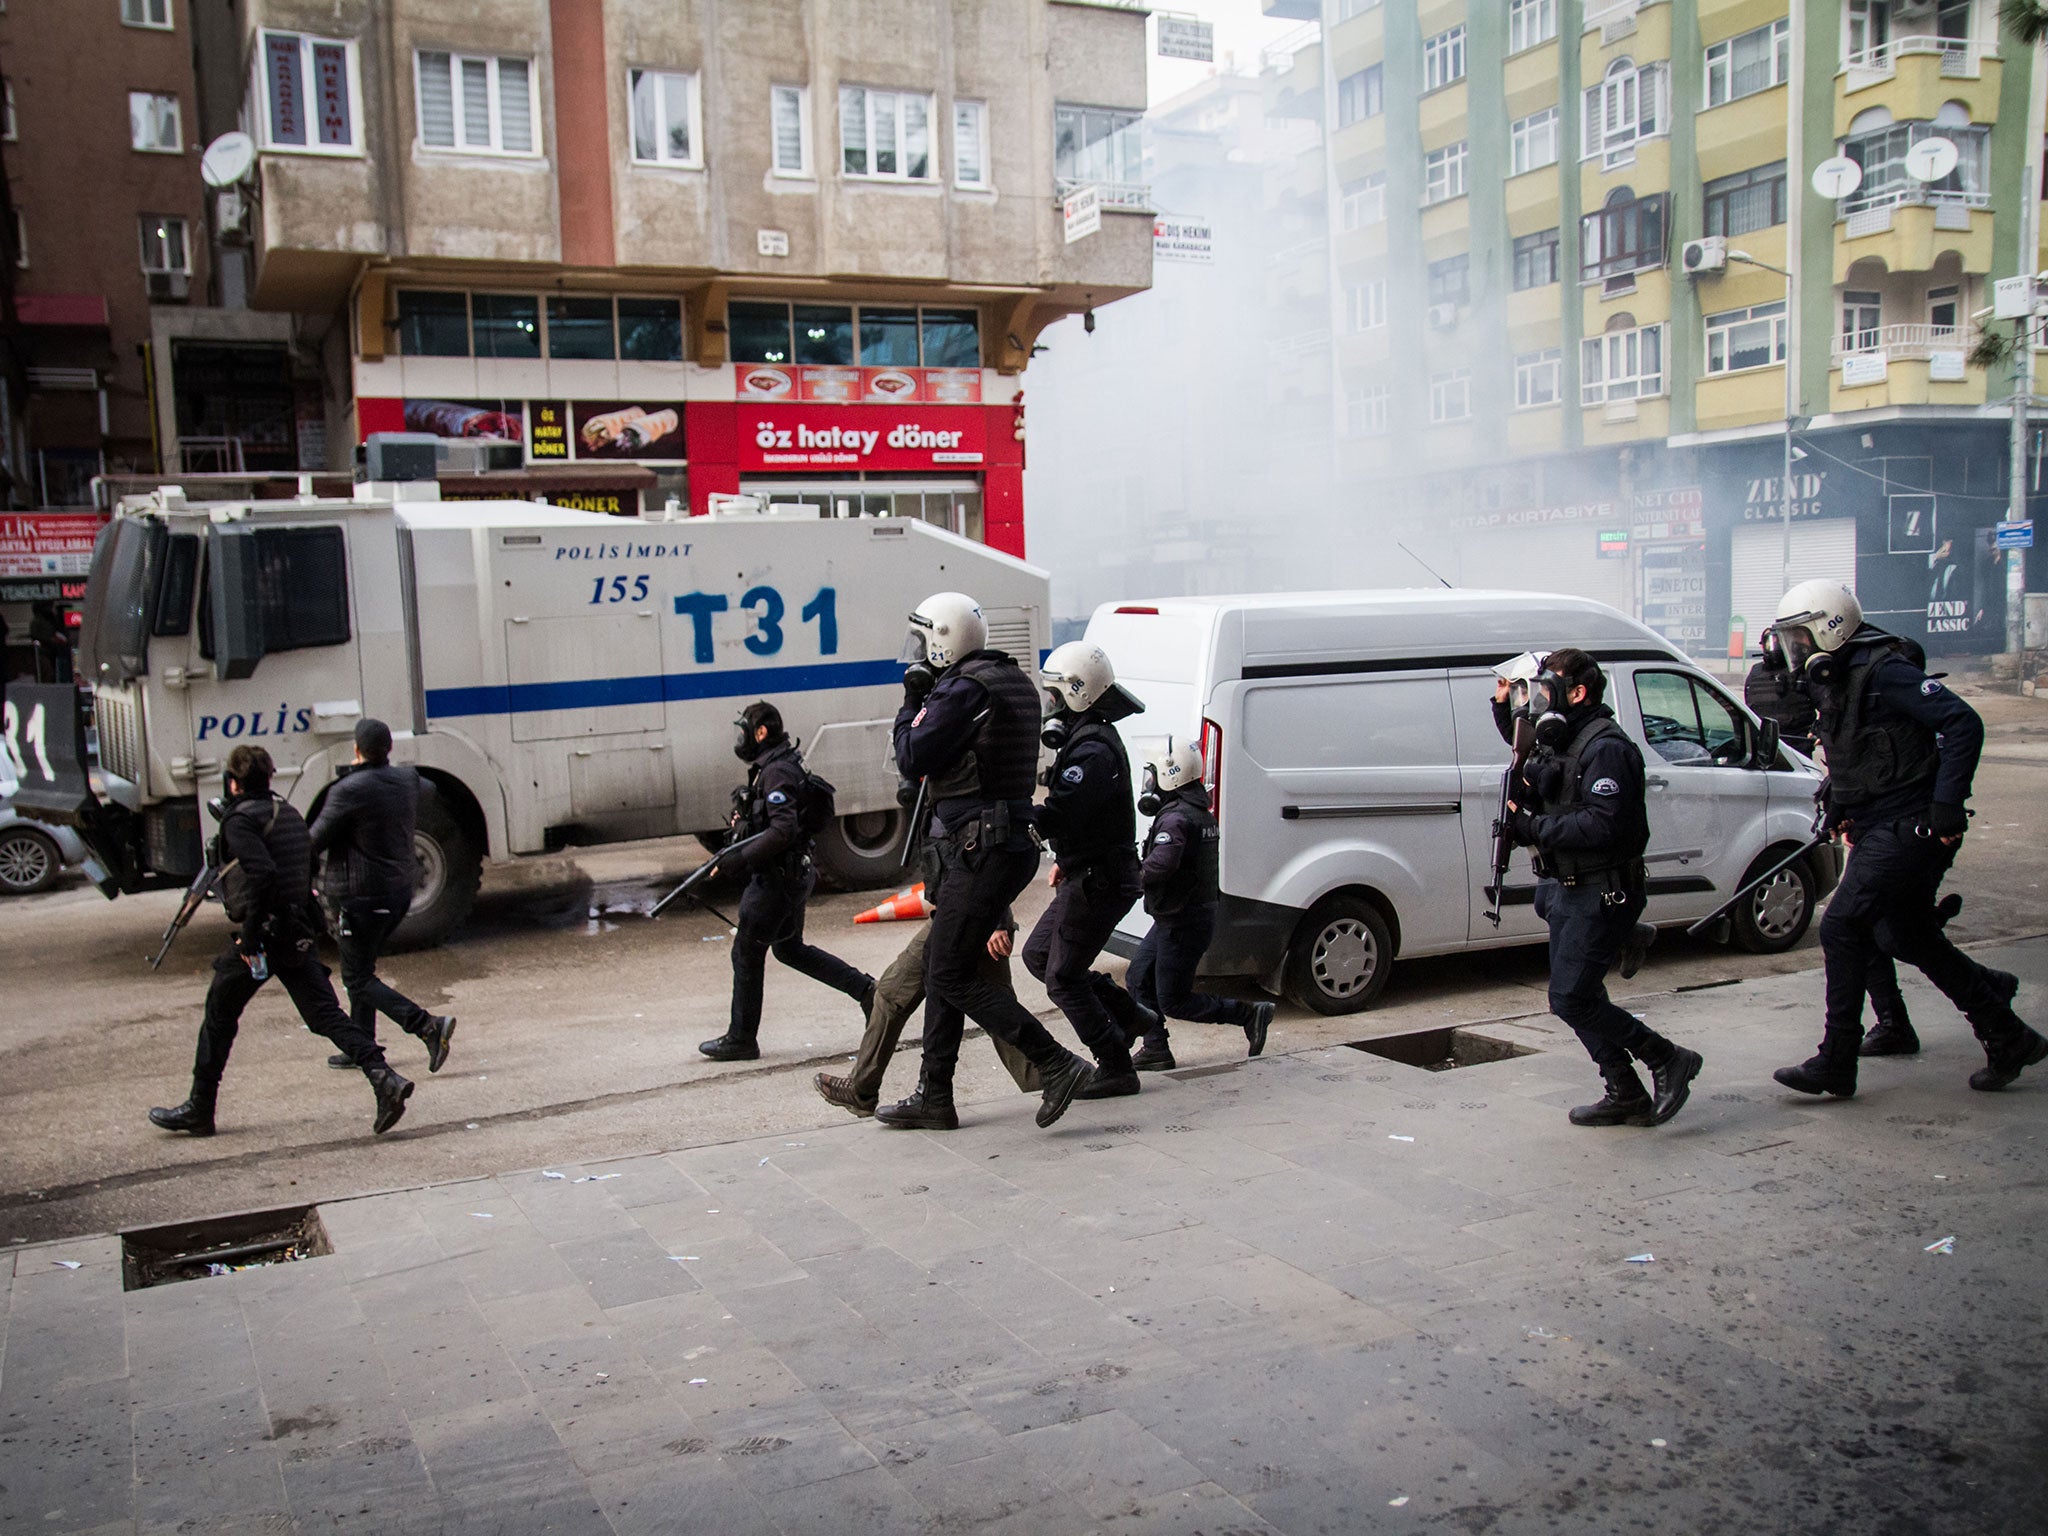 Demonstrations against the curfew in the Sur district in Diyarbakir ended in clashes with the police